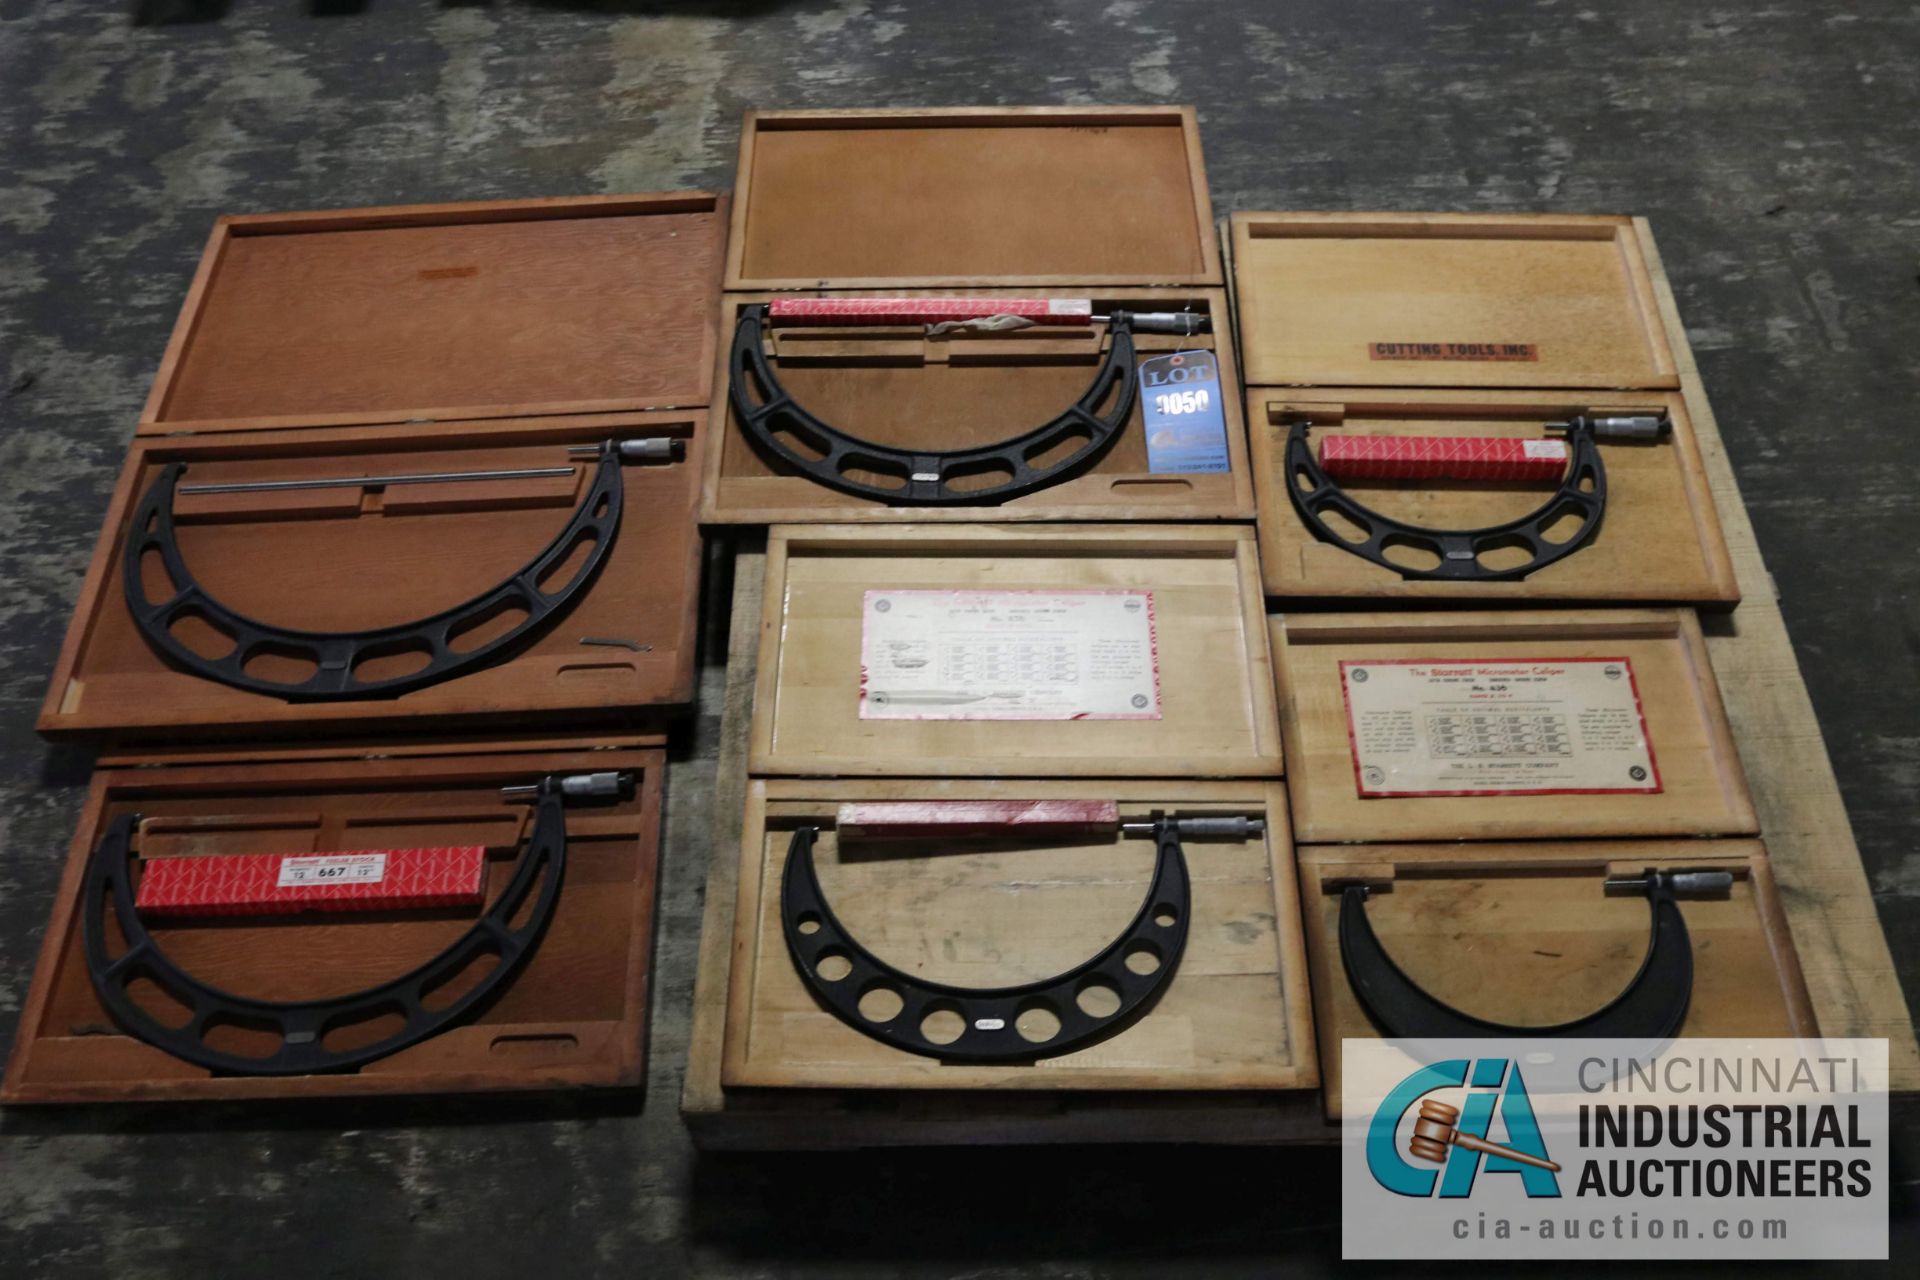 PALLET OF MEASUREMENT TOOLS (LARGE OD MICROMETERS) - Located in Bryan, Ohio